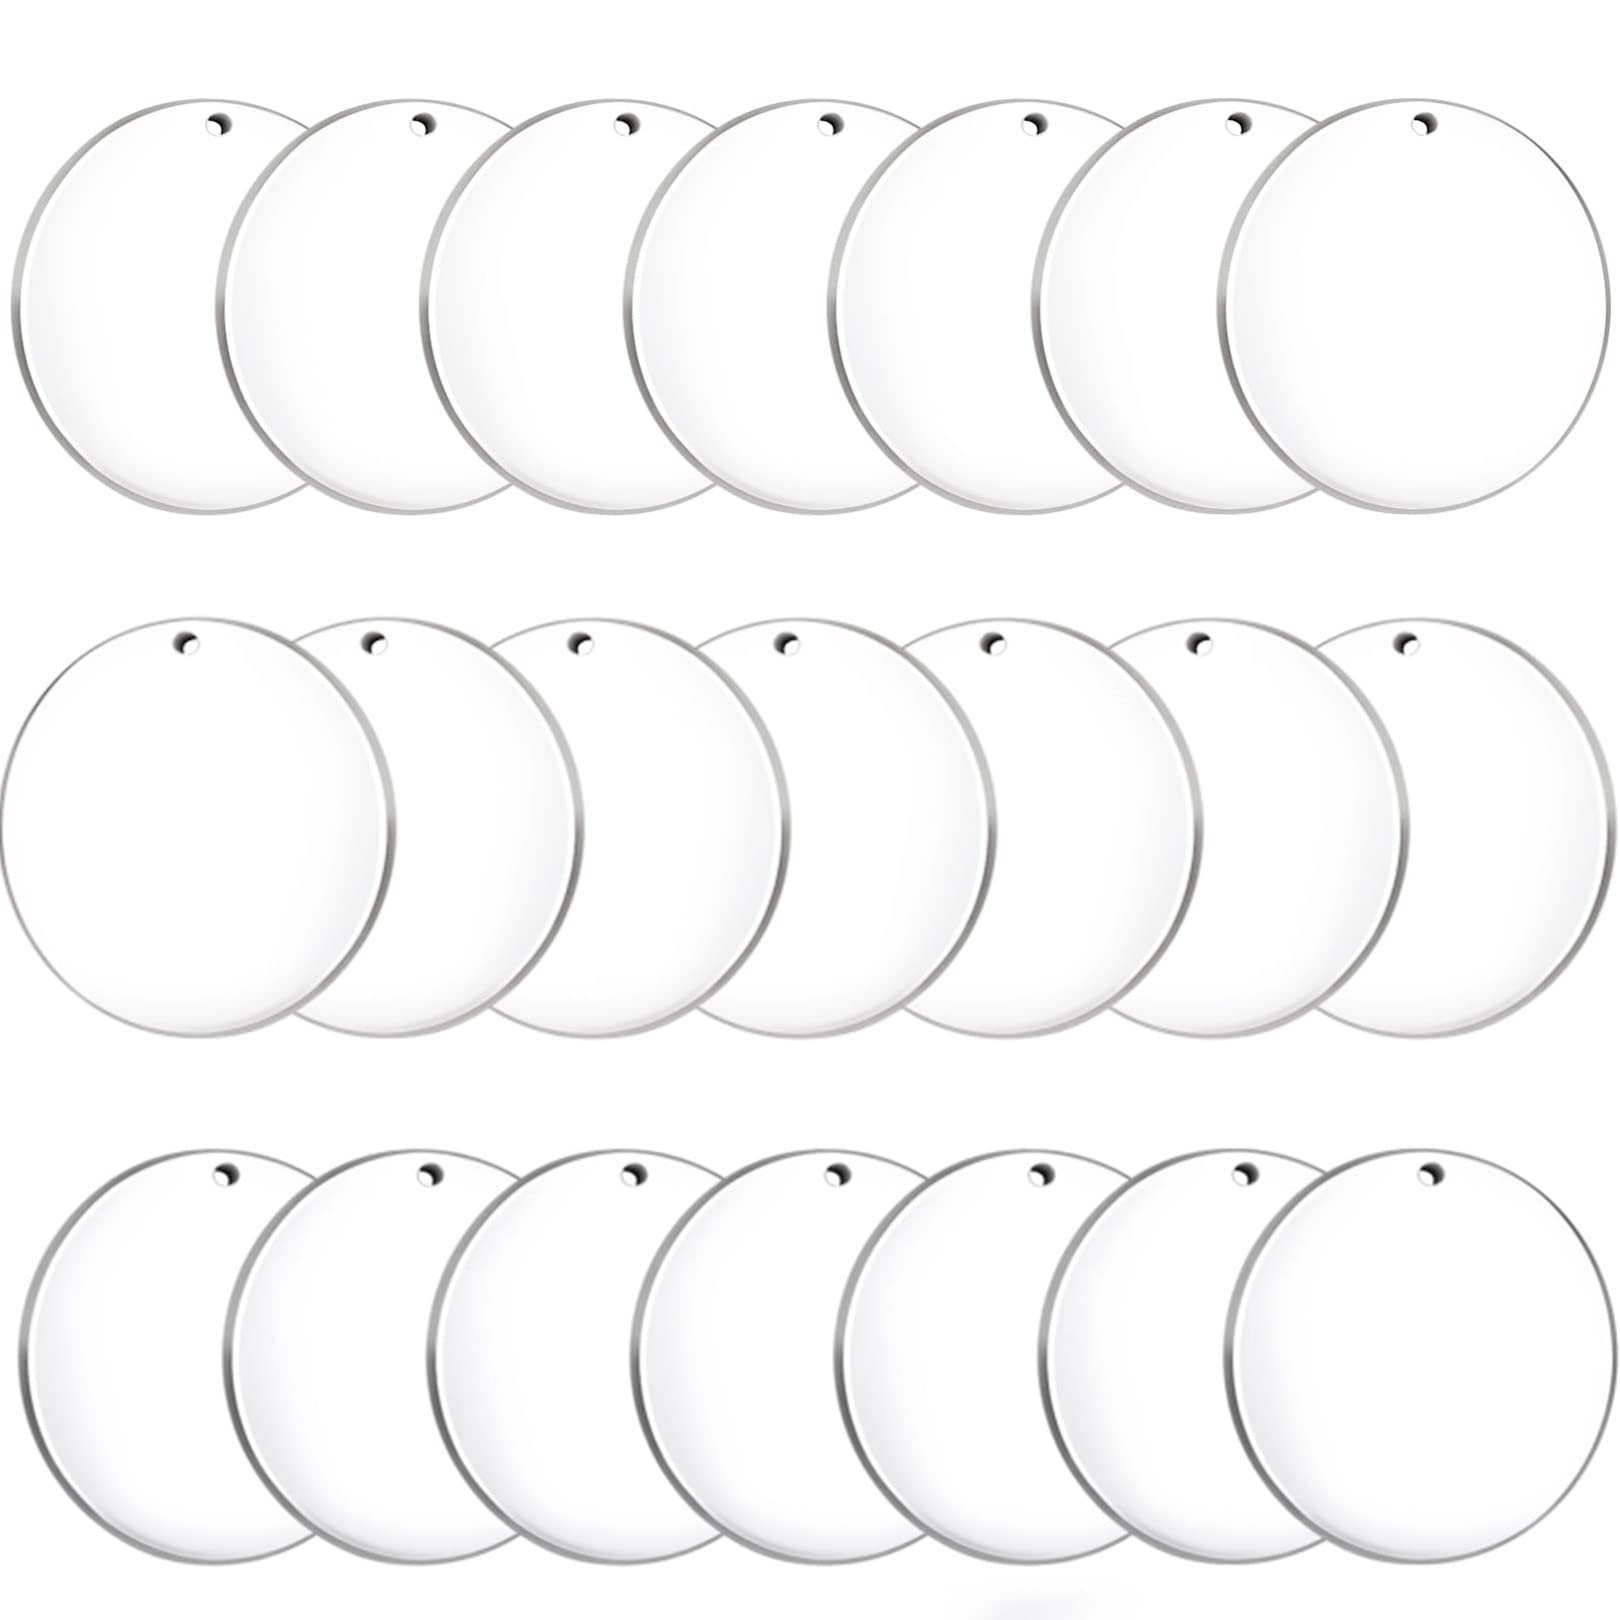 Senbota 100 Pcs Acrylic Keychain Blanks 2Inch Circle Acrylic Blanks with  Hole Clear Acrylic Discs Circles Bulk for Keychains Ornament Painting and  Vinyl Crafts Projects 100 2Inch(clear)